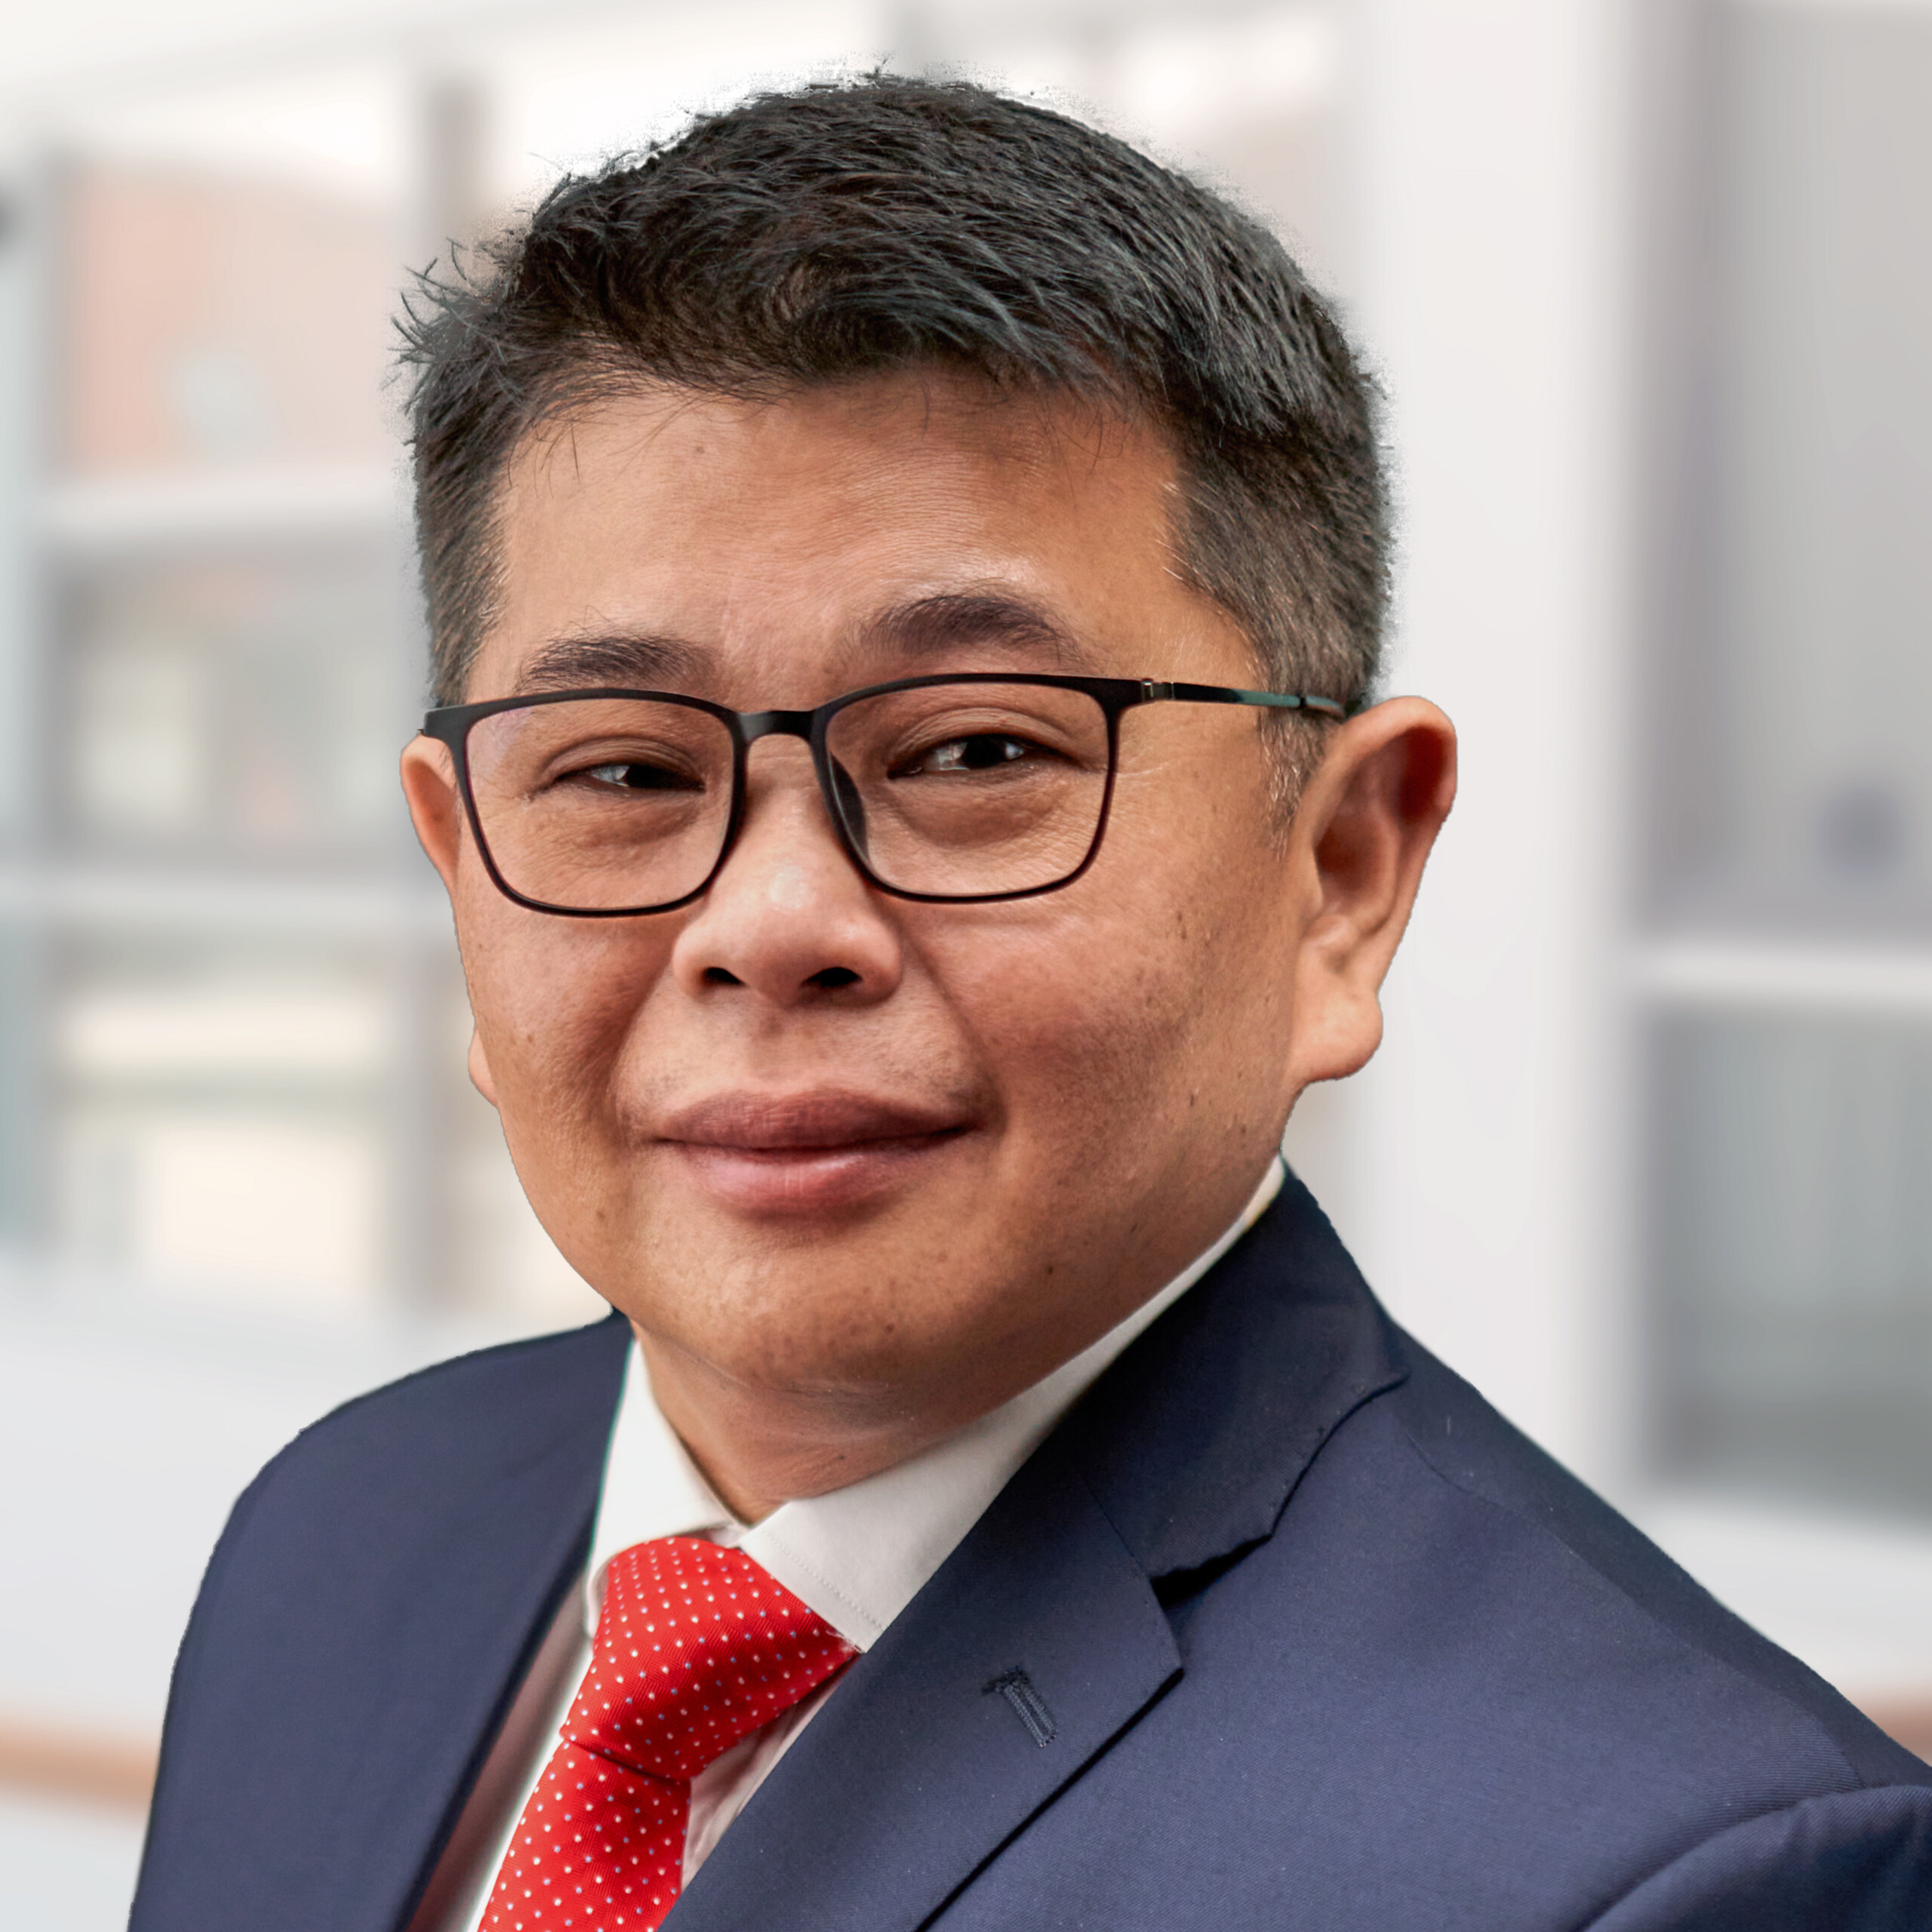 Danny Phuan, Head of Acquisitions Asia-Pacific at Allianz Real Estate